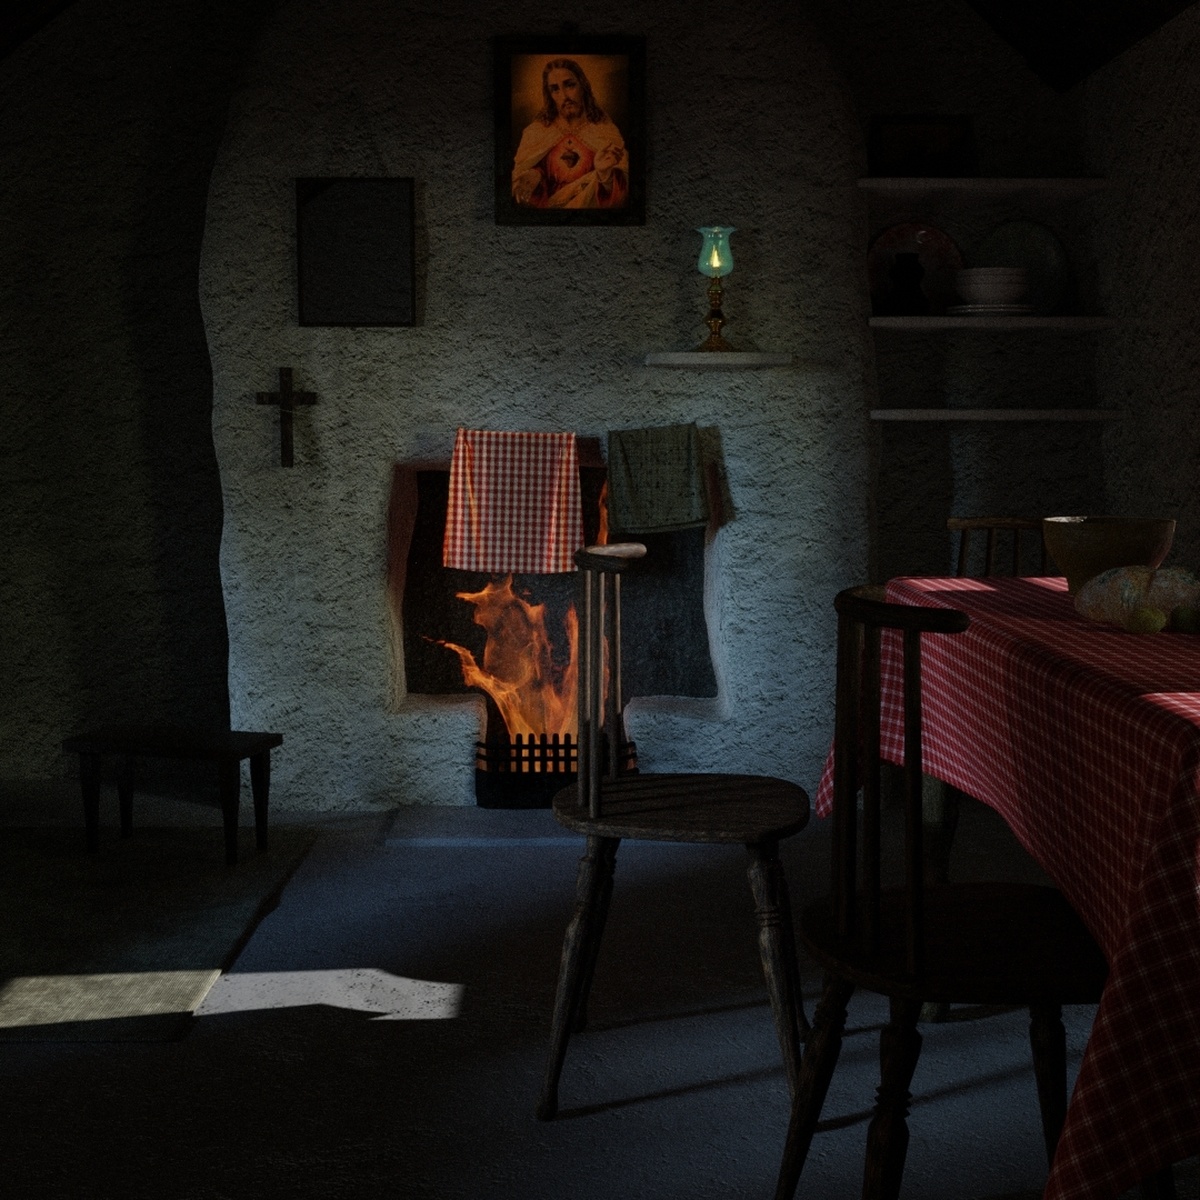 A 3D render of the cottage in the dark, with a fire burning the the fireplace and the lamp lit.